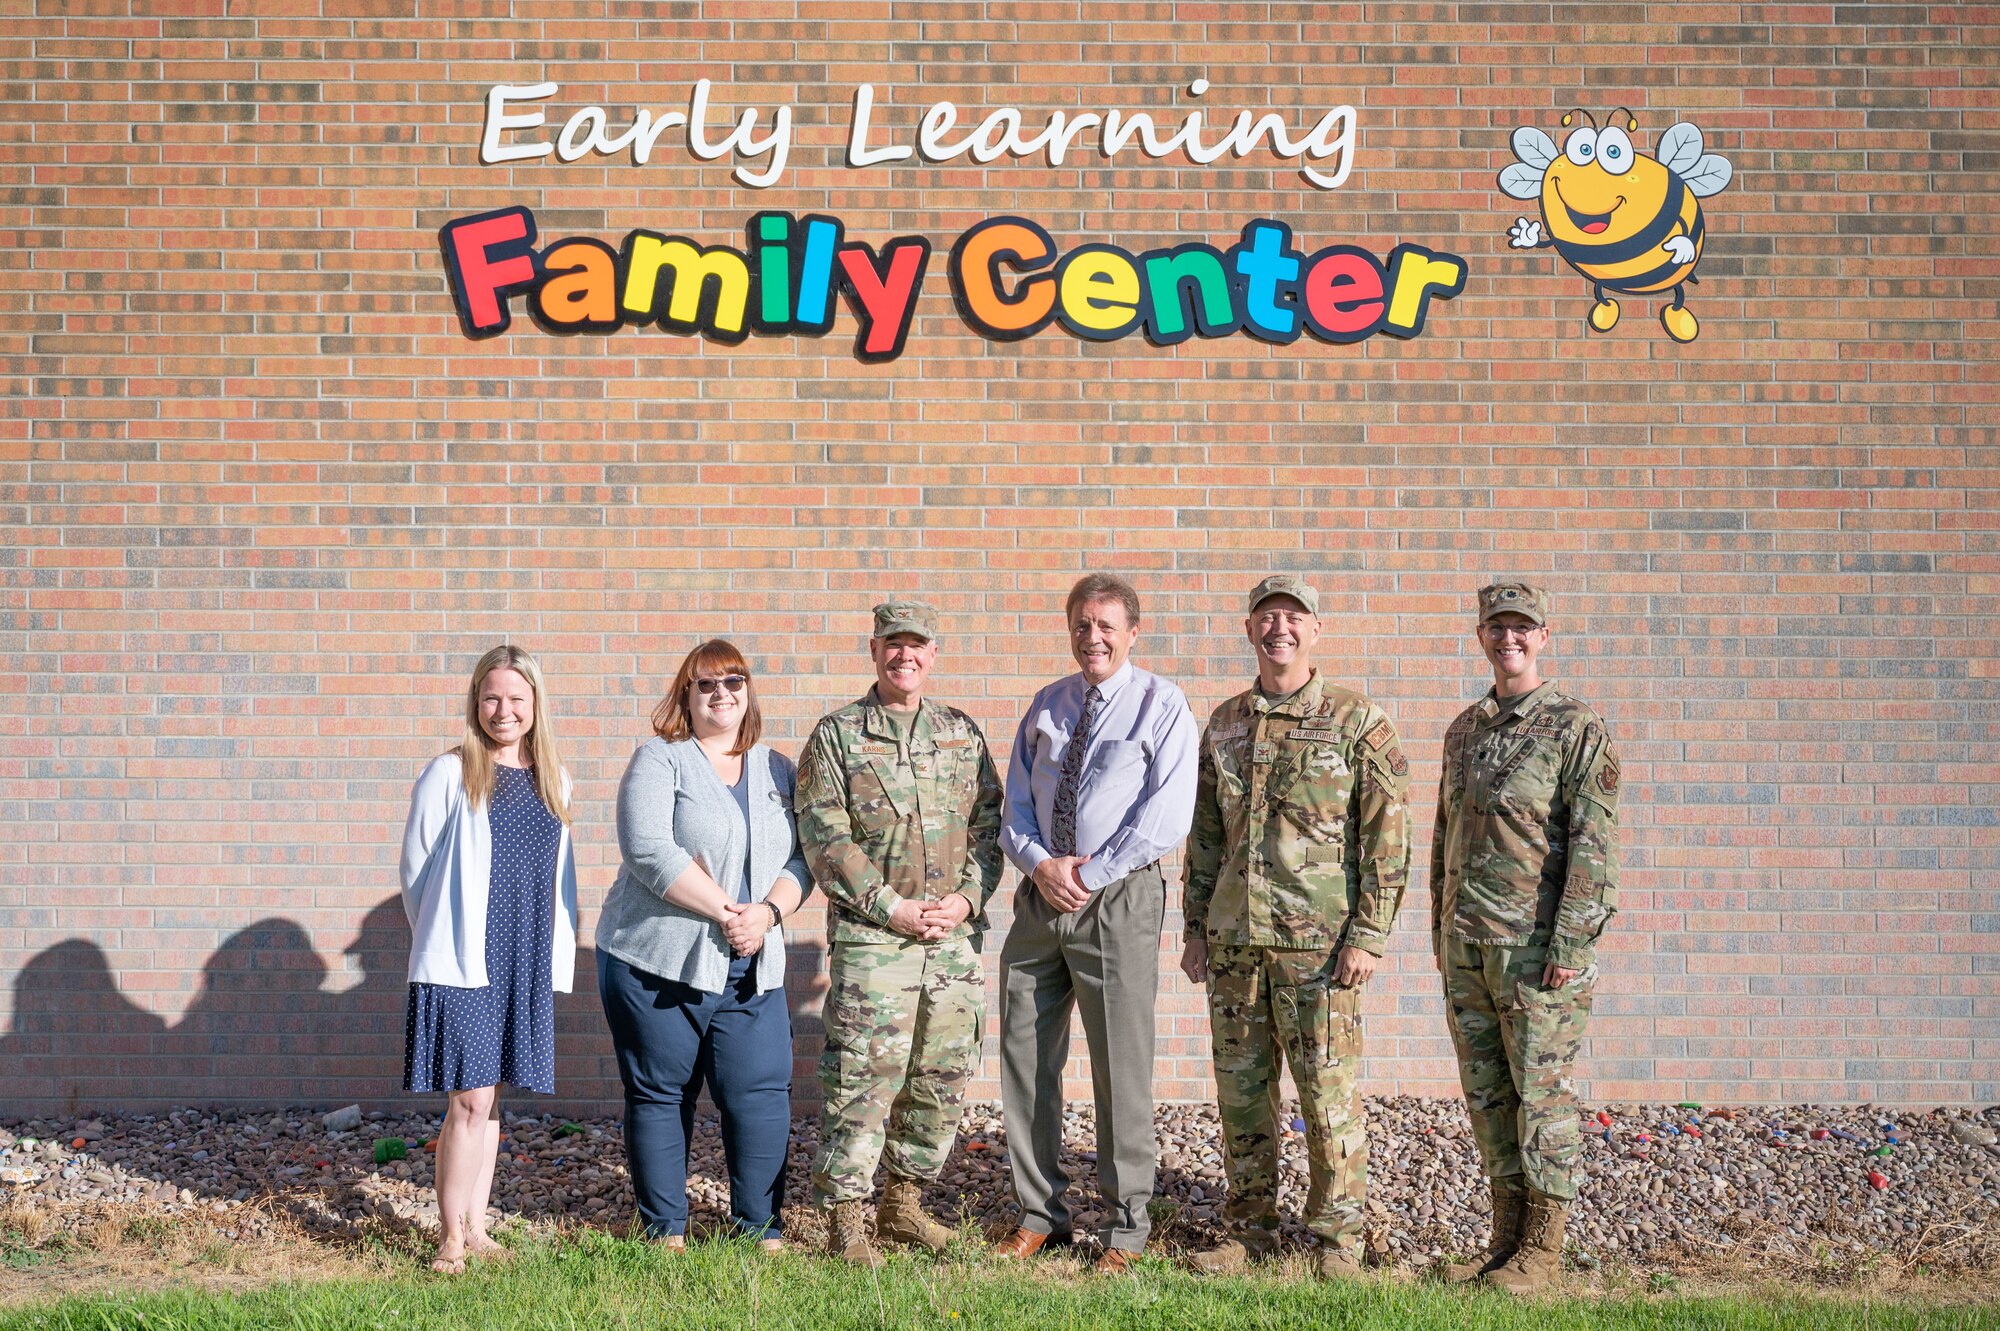 Malmstrom Air Force Base and Great Falls Public Schools leadership pose for a group photo in front of the GFPS Early Learning Family Center Aug. 29, 2022, in Great Falls, Mont.